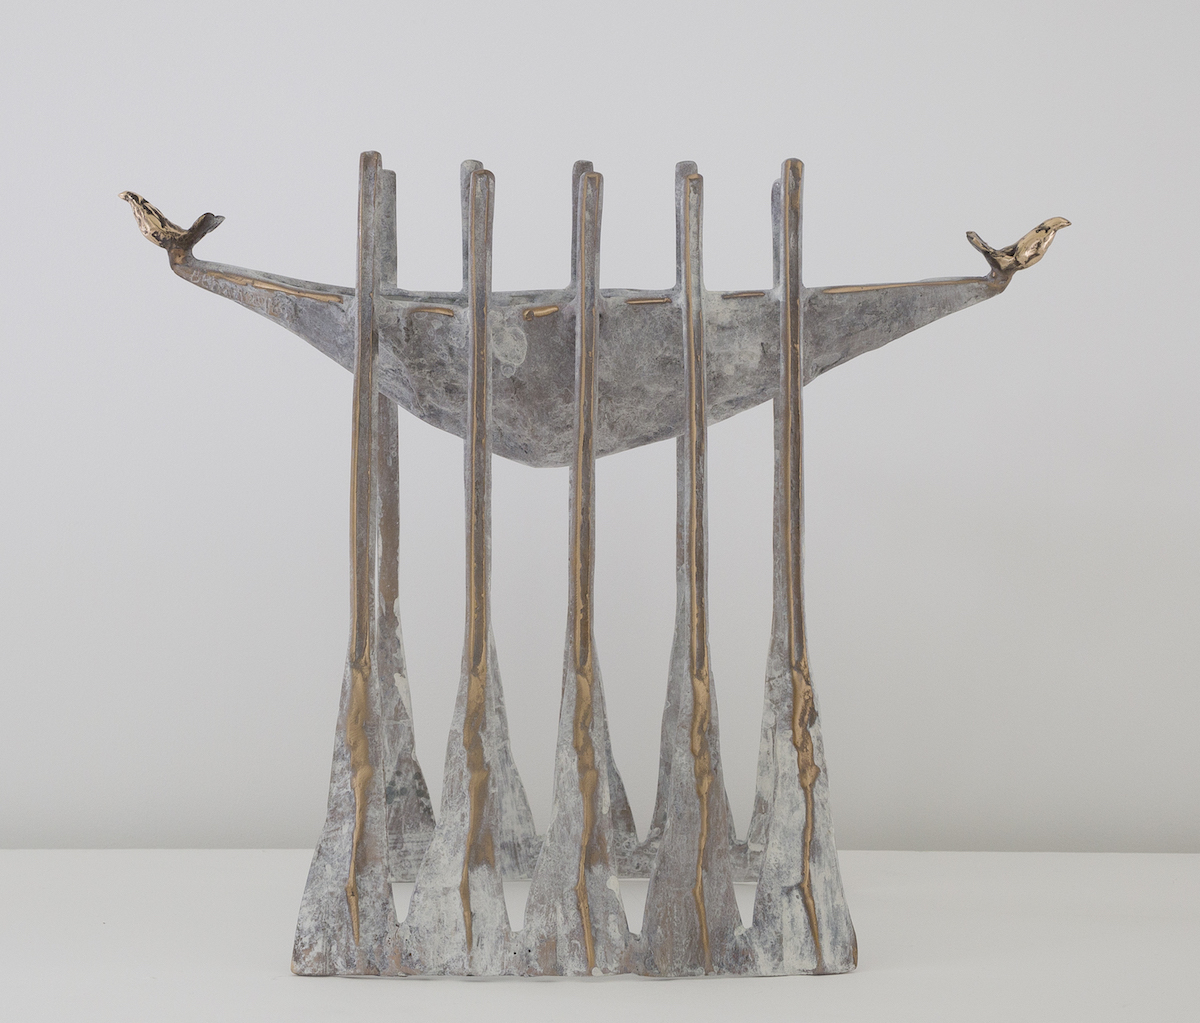 Two Bird Oar Boat  (one sold please enquire about the next piece in the edition )